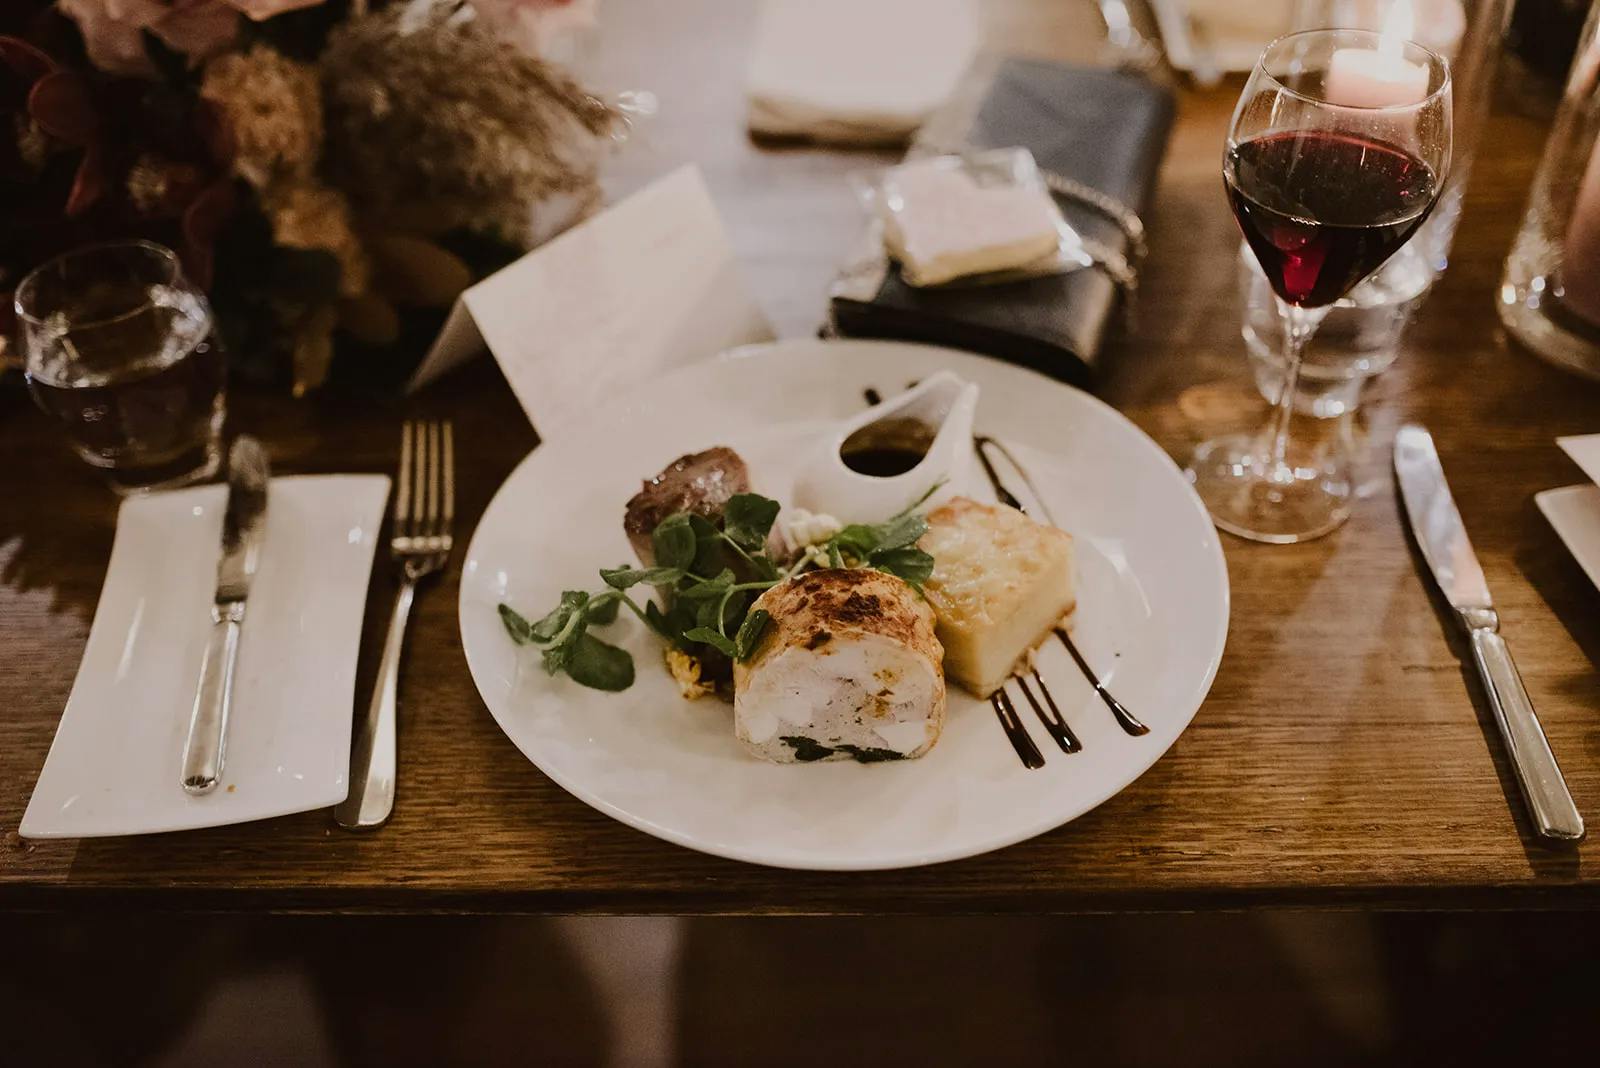 A white plate on a wooden table holds a gourmet meal, including a piece of meat, mashed potatoes, greens, and sauce in a small dish. A glass of red wine, a water glass, cutlery, and a folded napkin are neatly arranged around it. Decor is visible in the background.